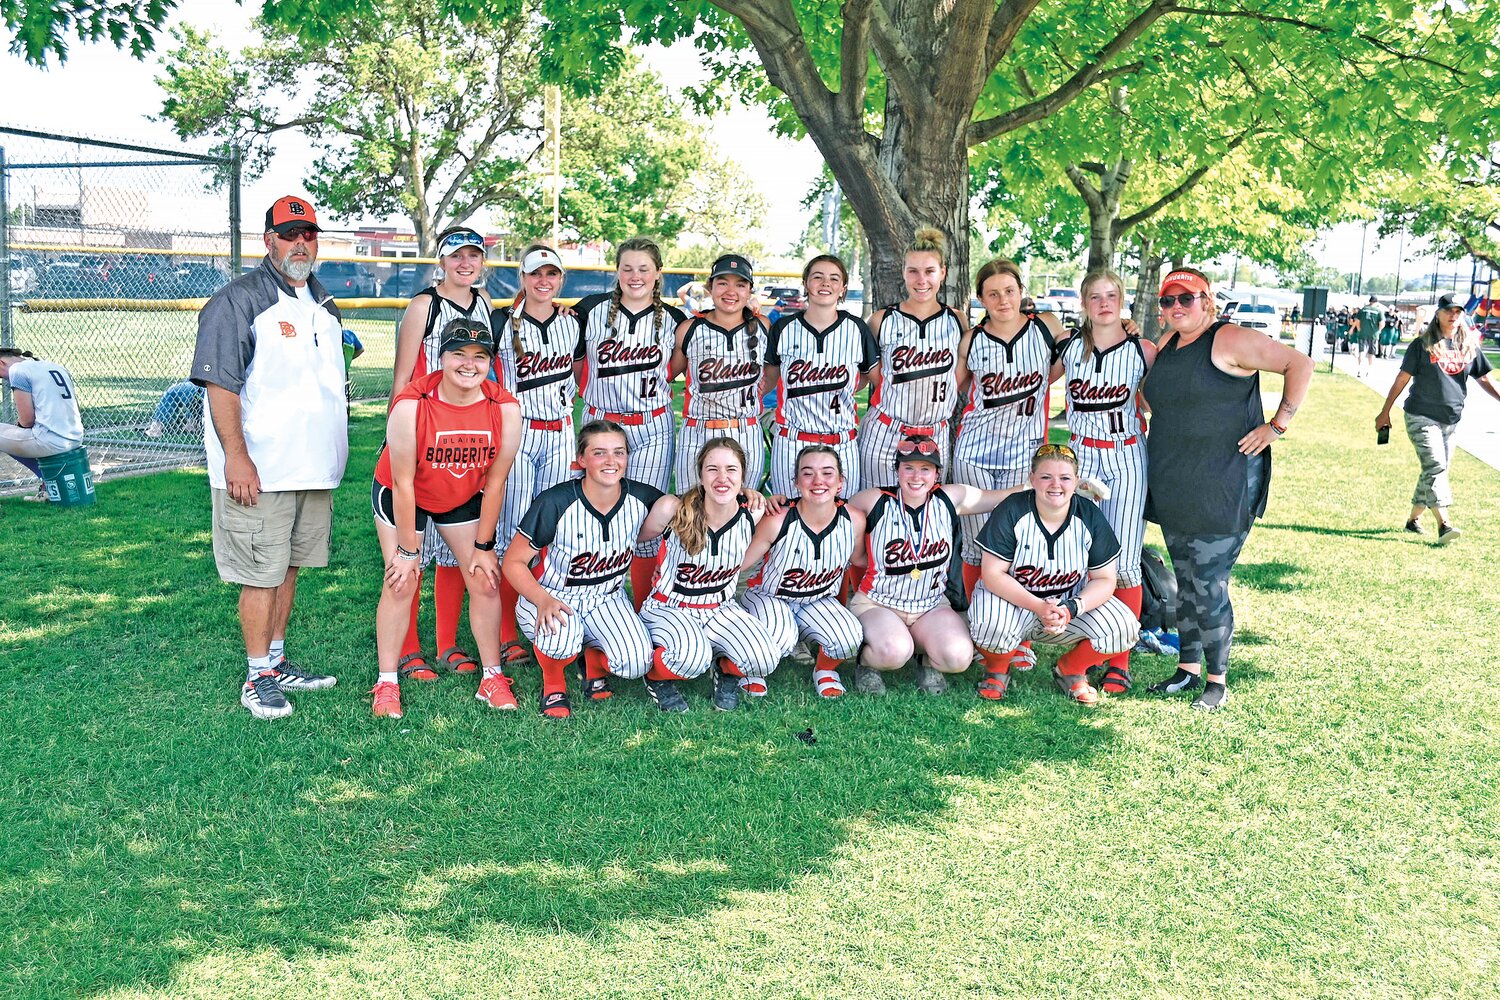 Blaine’s varsity girls softball team at the 1A state championship in Richland on May 27. The Lady Borderites lost 10-0 to eventual state champions Montesano in the semifinal. This was the first time softball went to state since 2009. Coaches Sean Miller, l., and Riley Miller, r., stand beside their team.